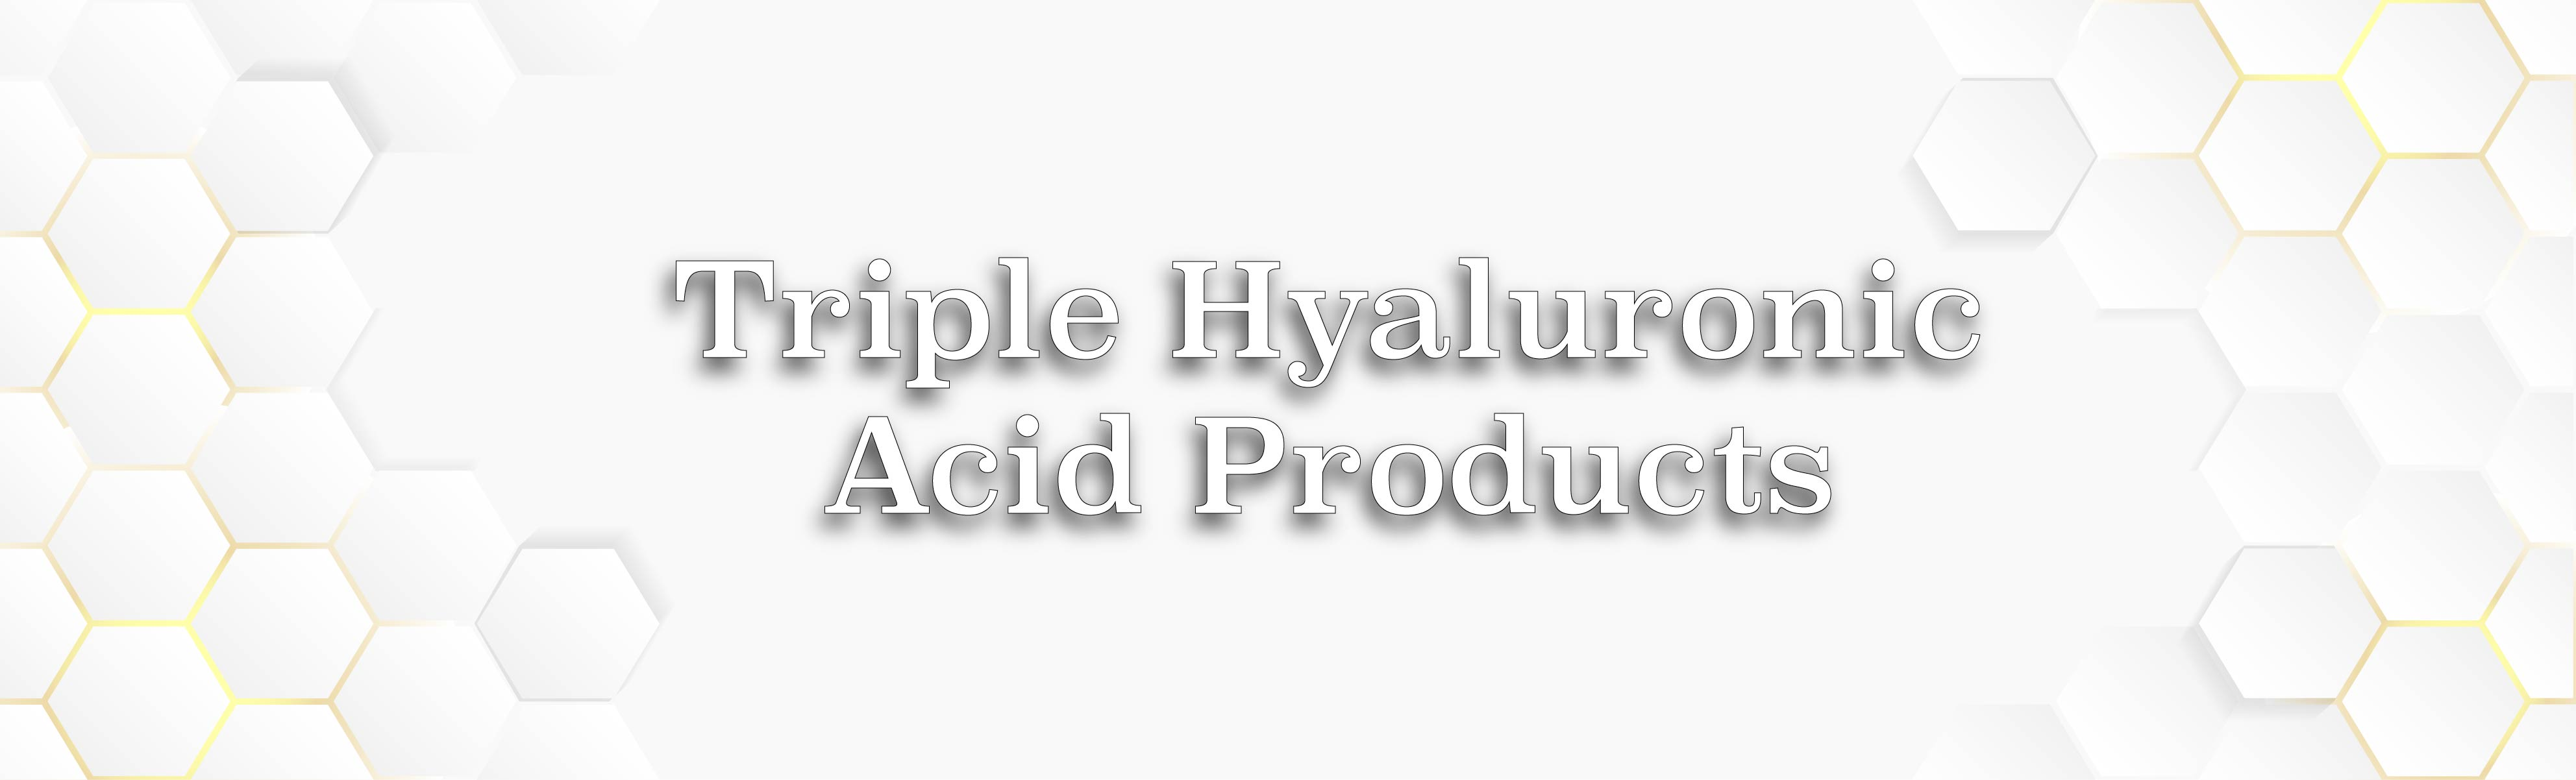 Triple Hyaluronic Acid Products